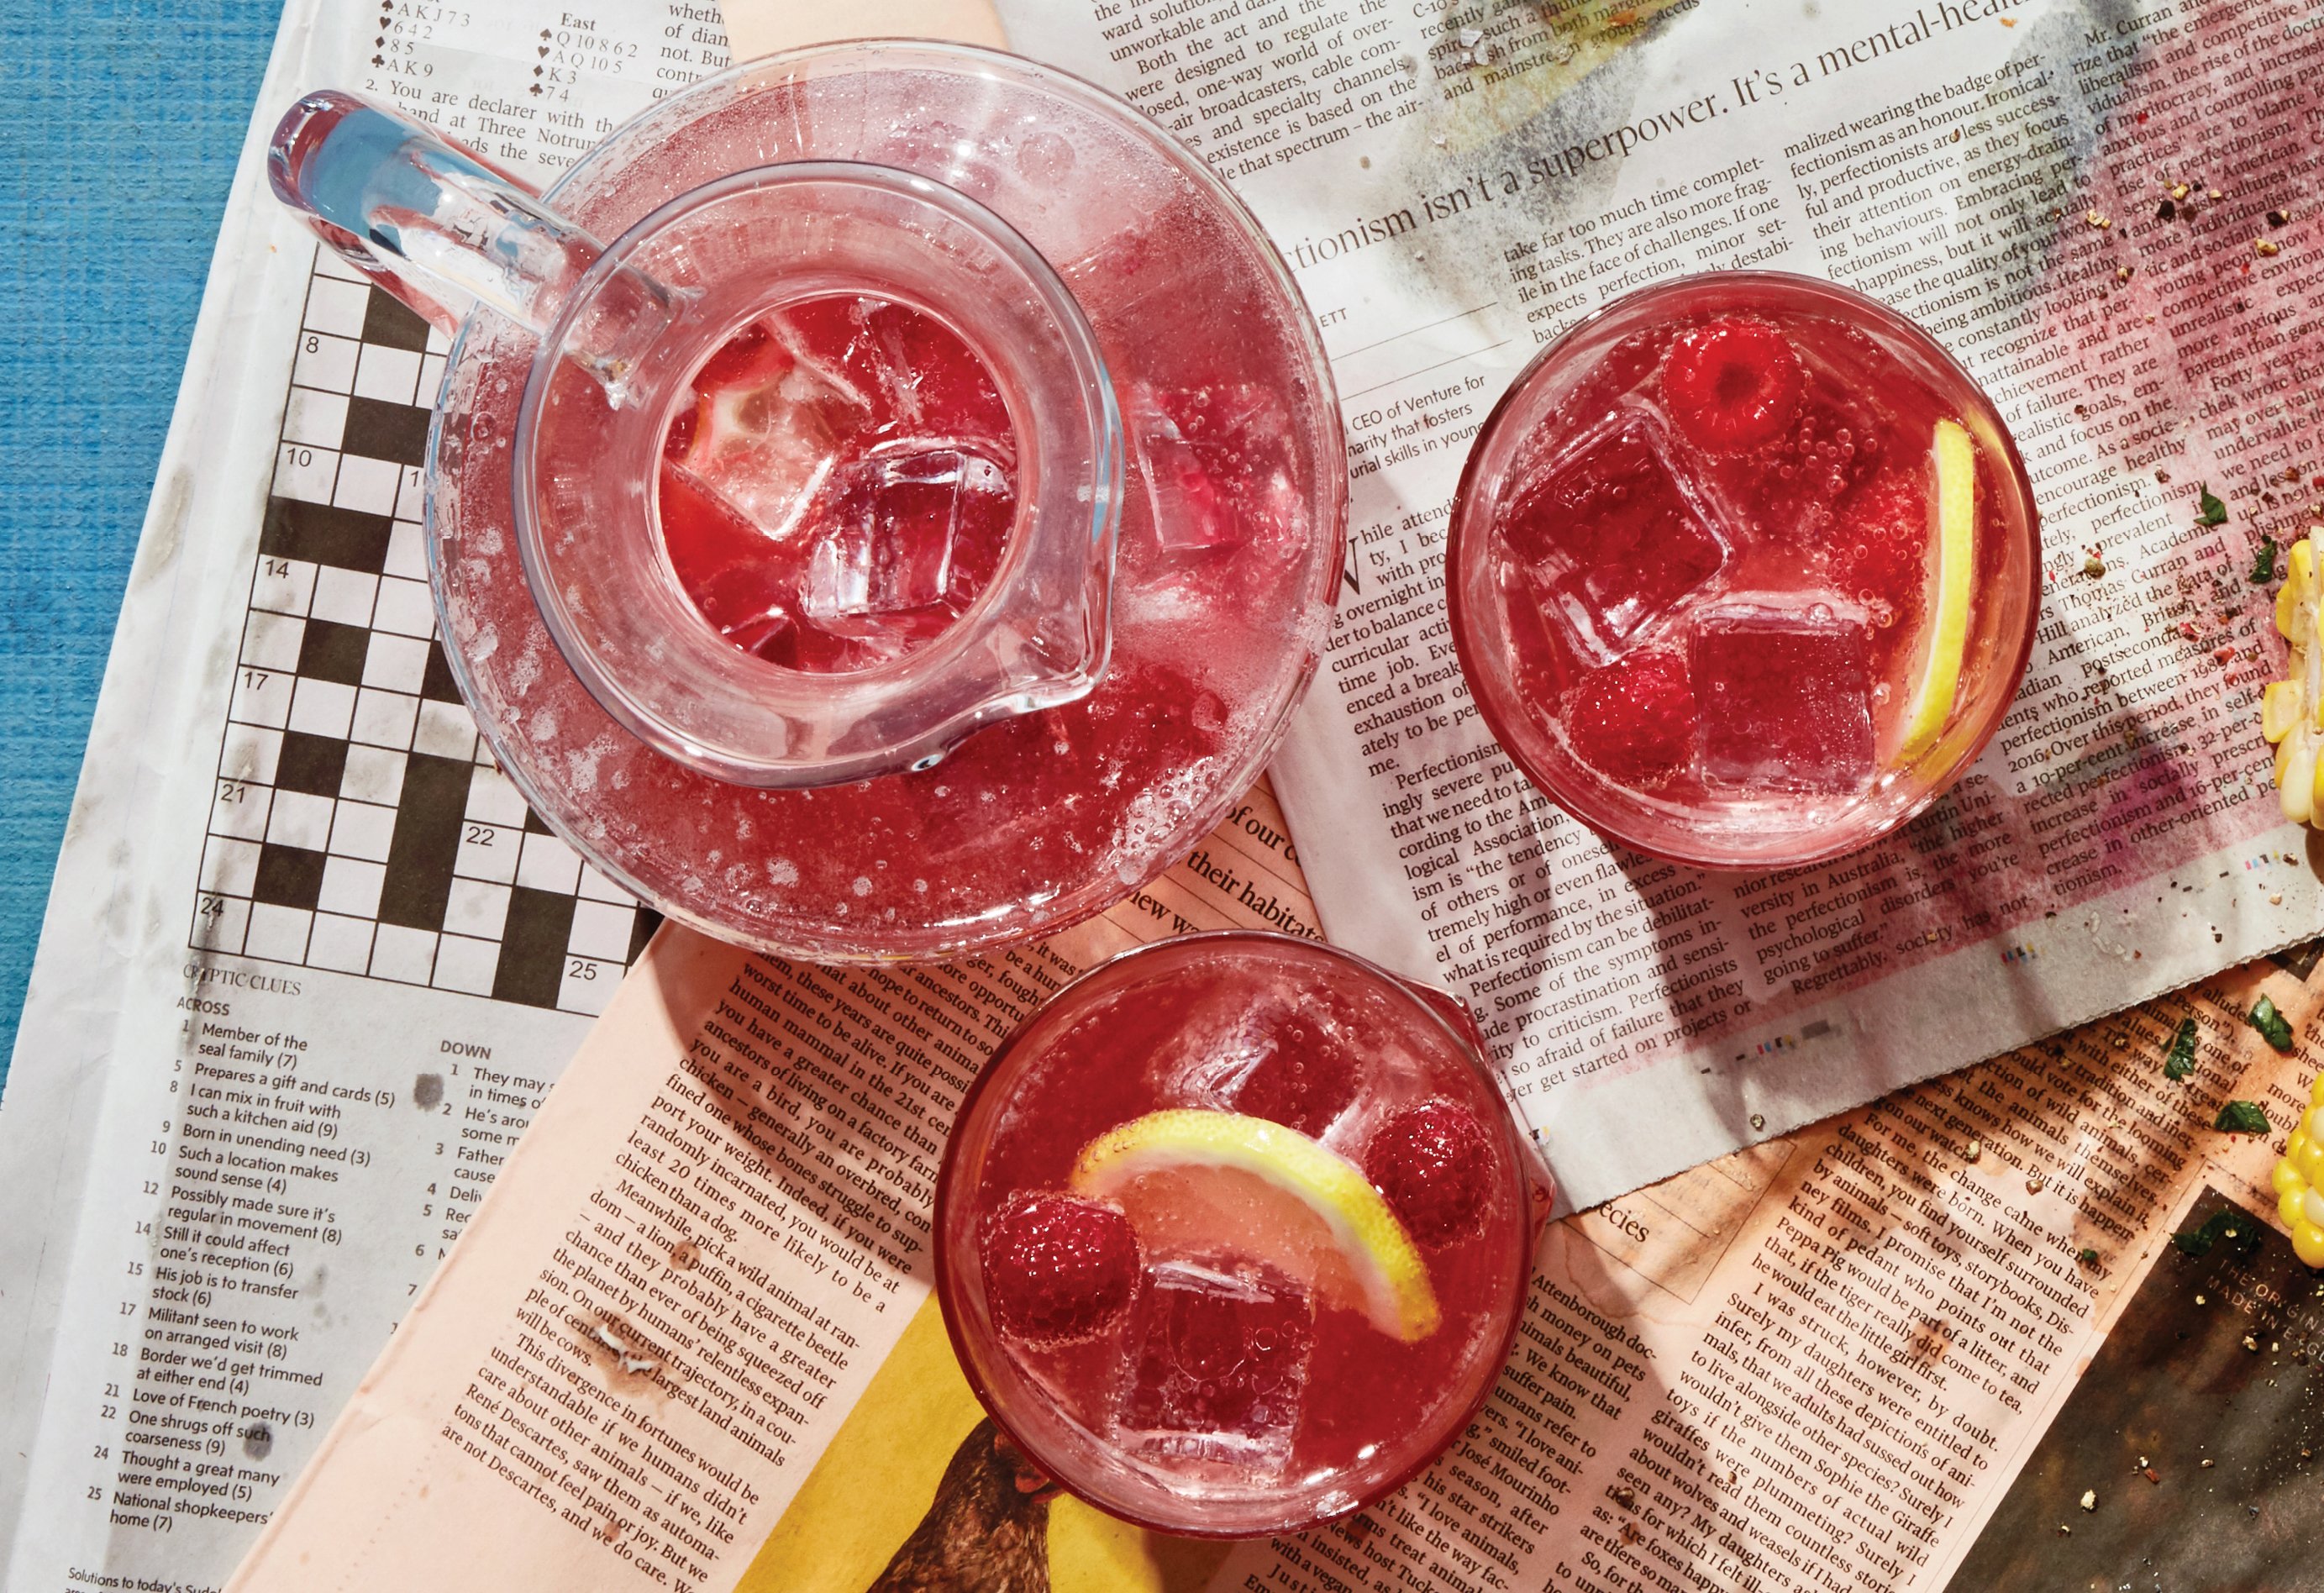 A pitcher of ice-filled raspberry cordial and two glasses, garnished with lemons, on a newspaper backdrop